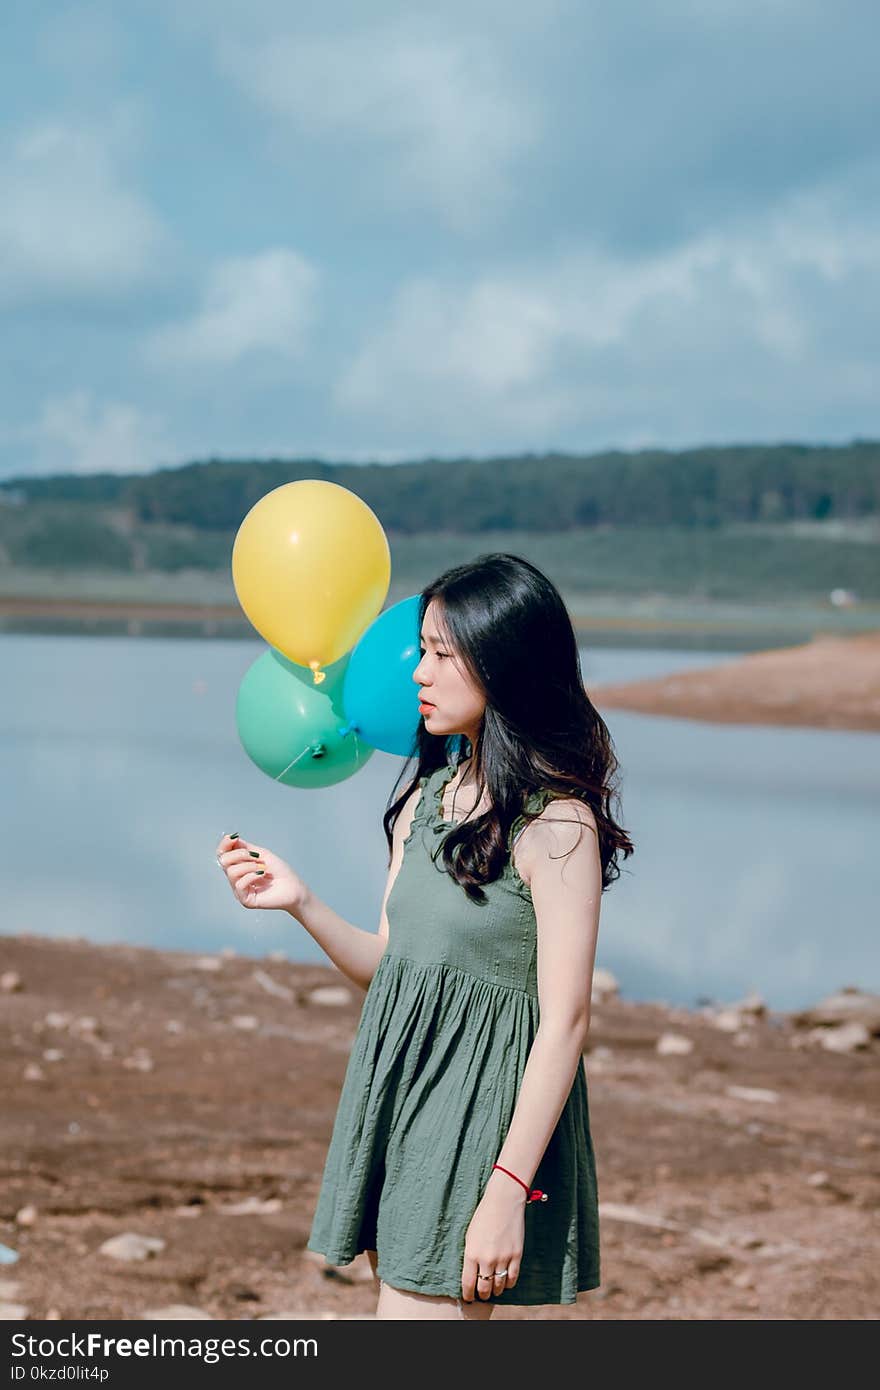 Woman in Green Sleeveless Dress Holding Yellow, Green, and Blue Balloons